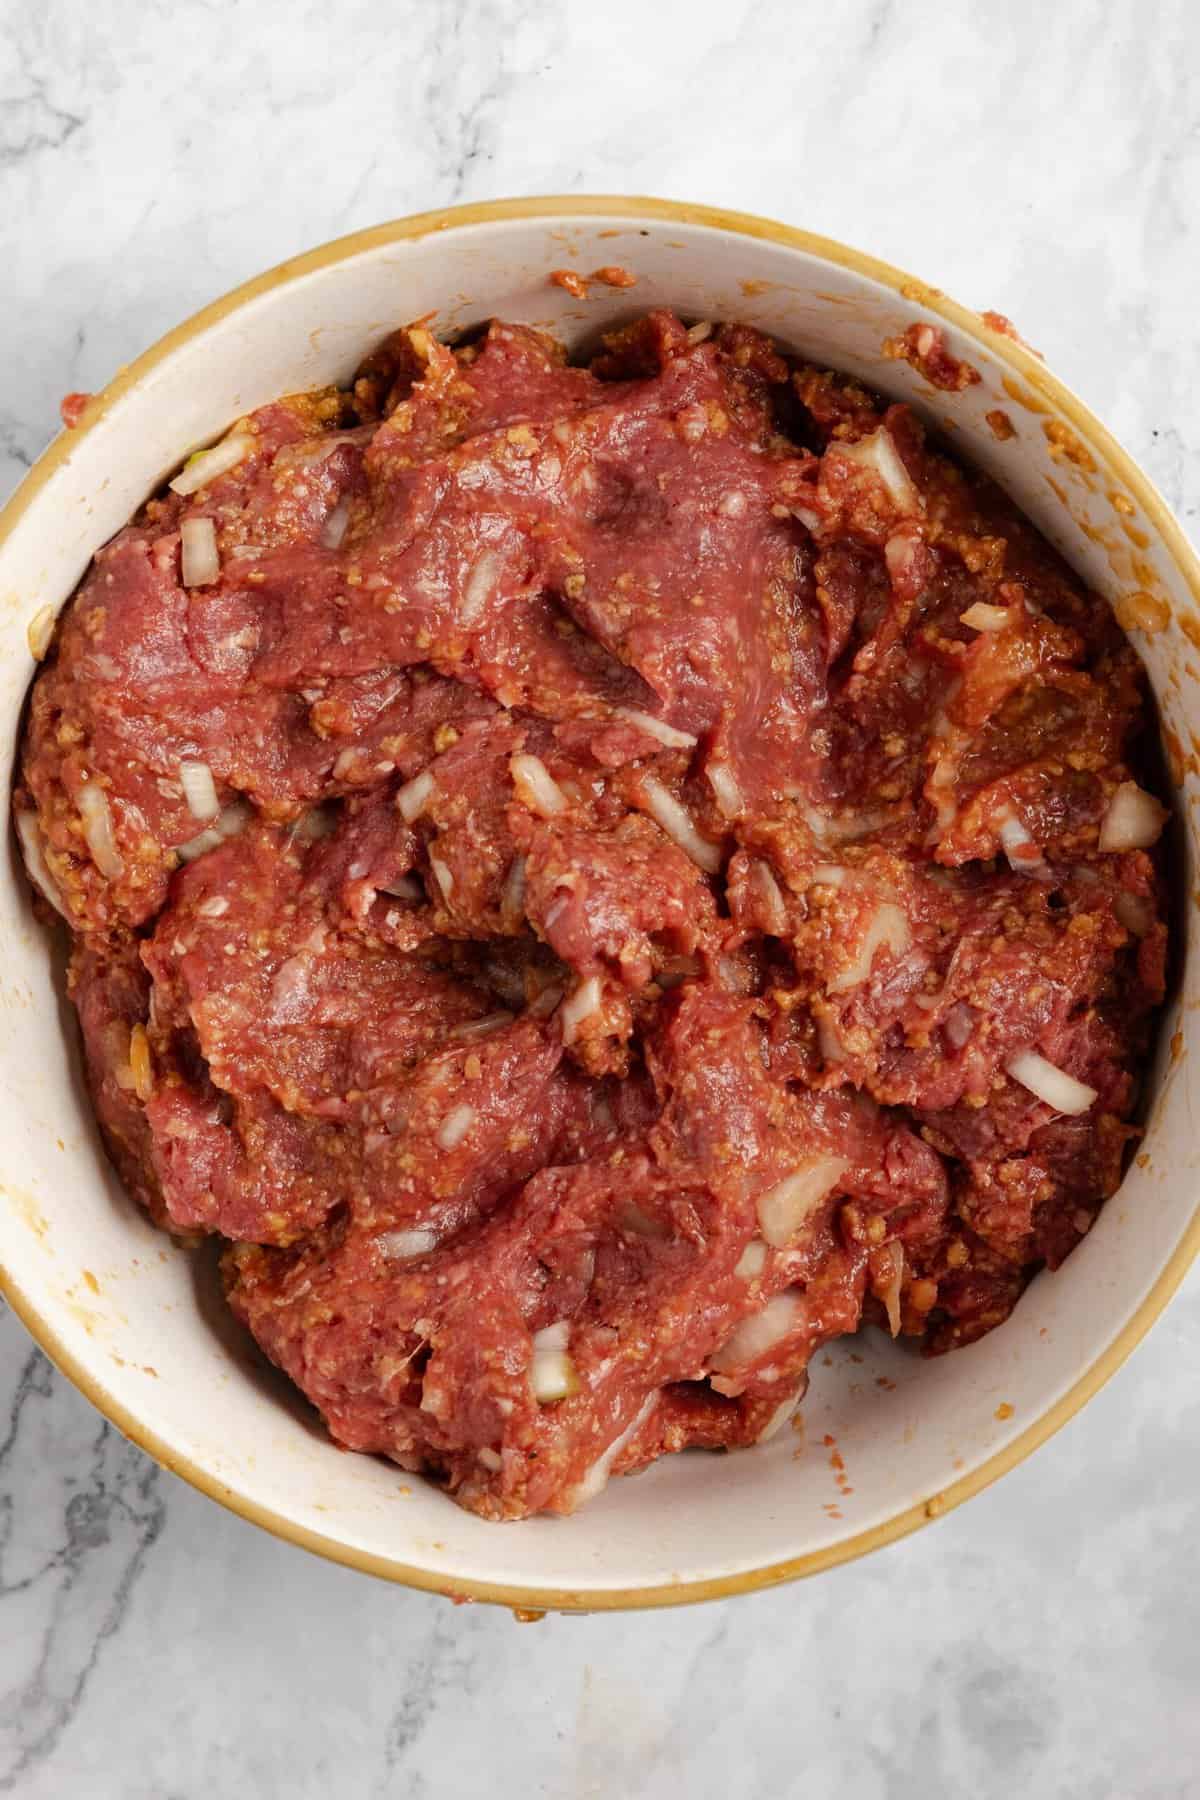 All of the ingredients for meatloaf mixed together, including ground beef, in a large bowl sitting on a white countertop